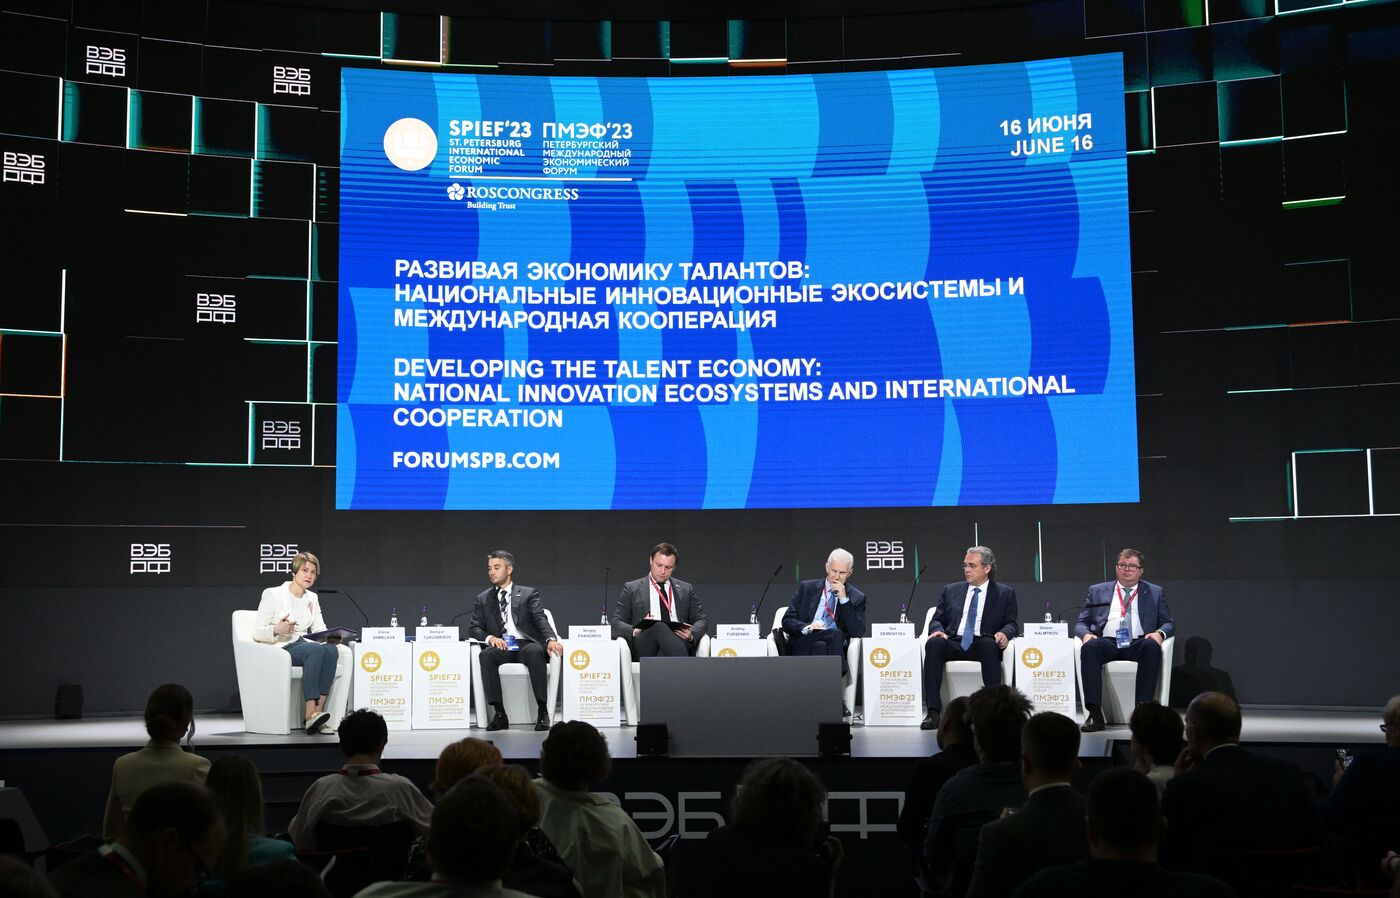 SPIEF-2023. Developing the Talent Economy: National Innovation Ecosystems and International Cooperation